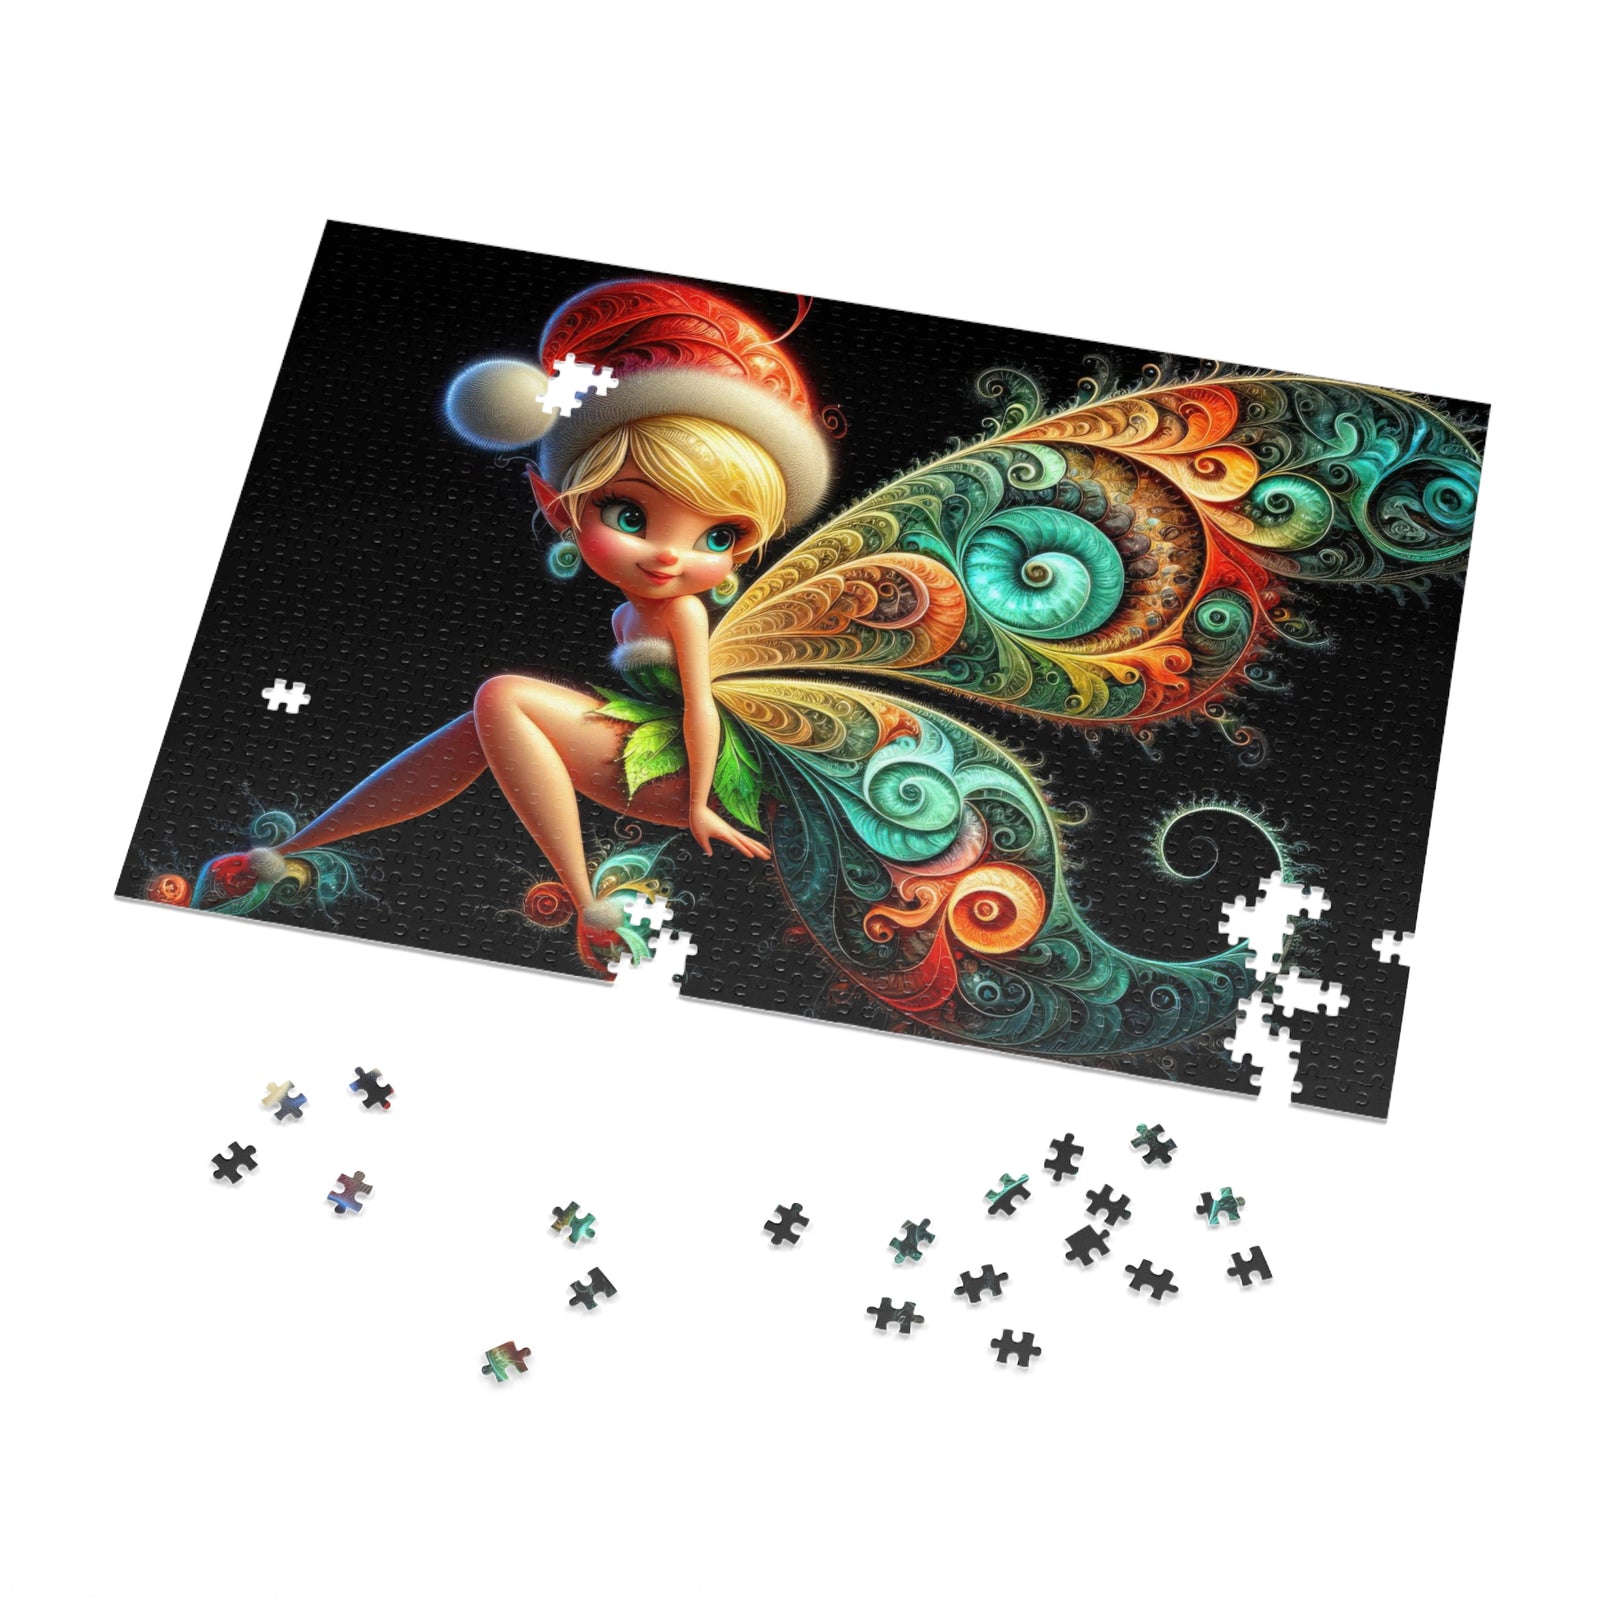 Whispering Wings of Whimsy Jigsaw Puzzle